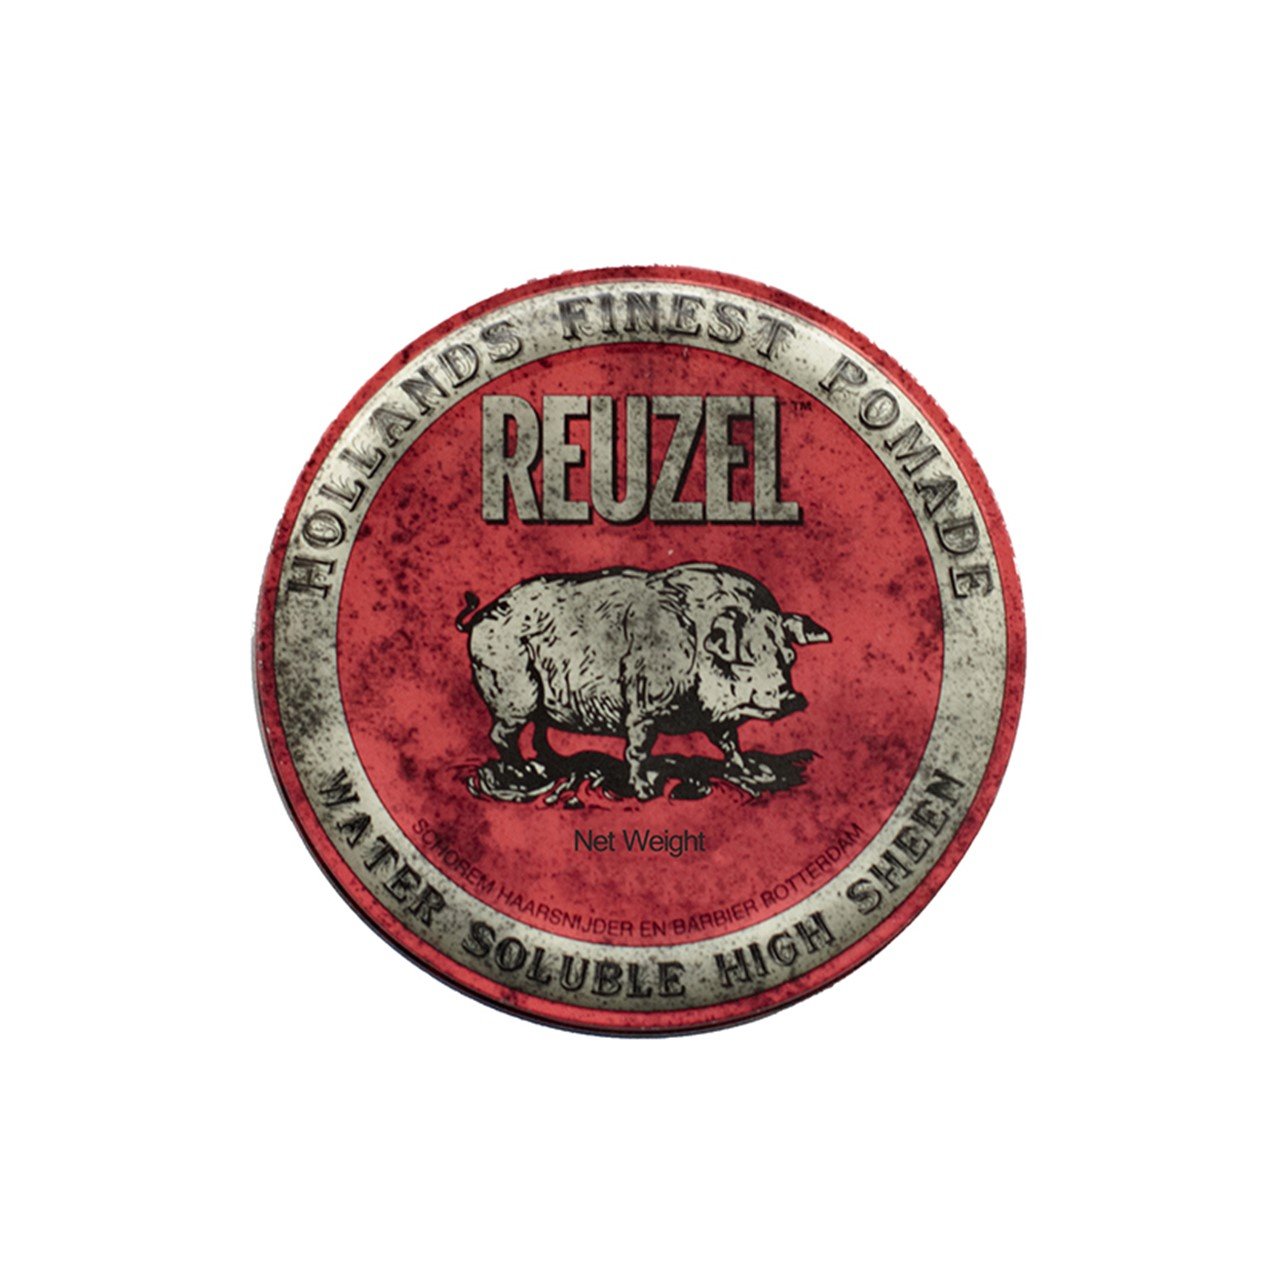 Reuzel Red Pomade Water Soluble High Sheen 340g (11.99oz)